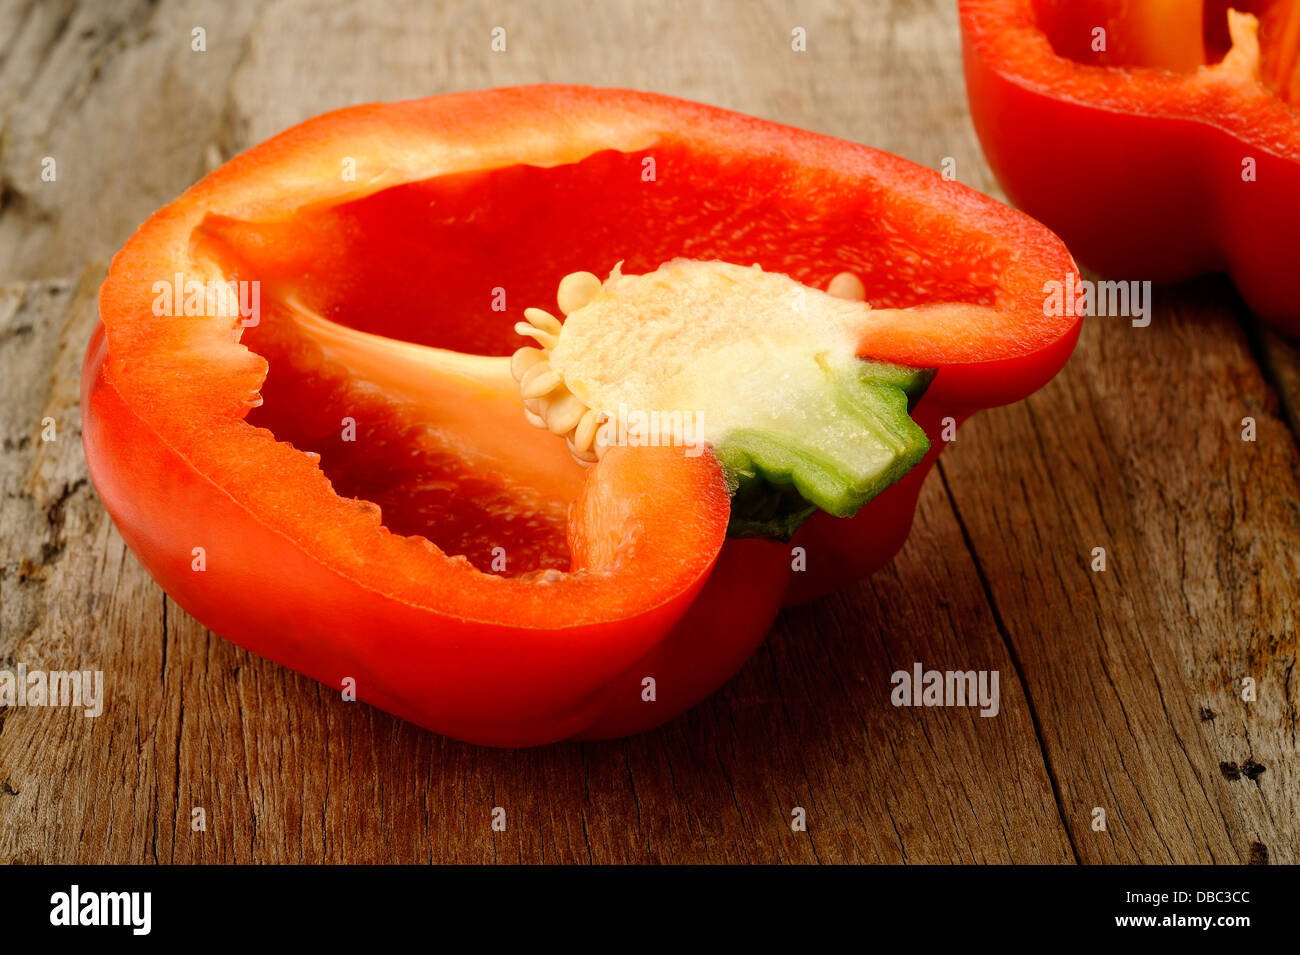 Cross section red bell pepper on wooden background Stock Photo